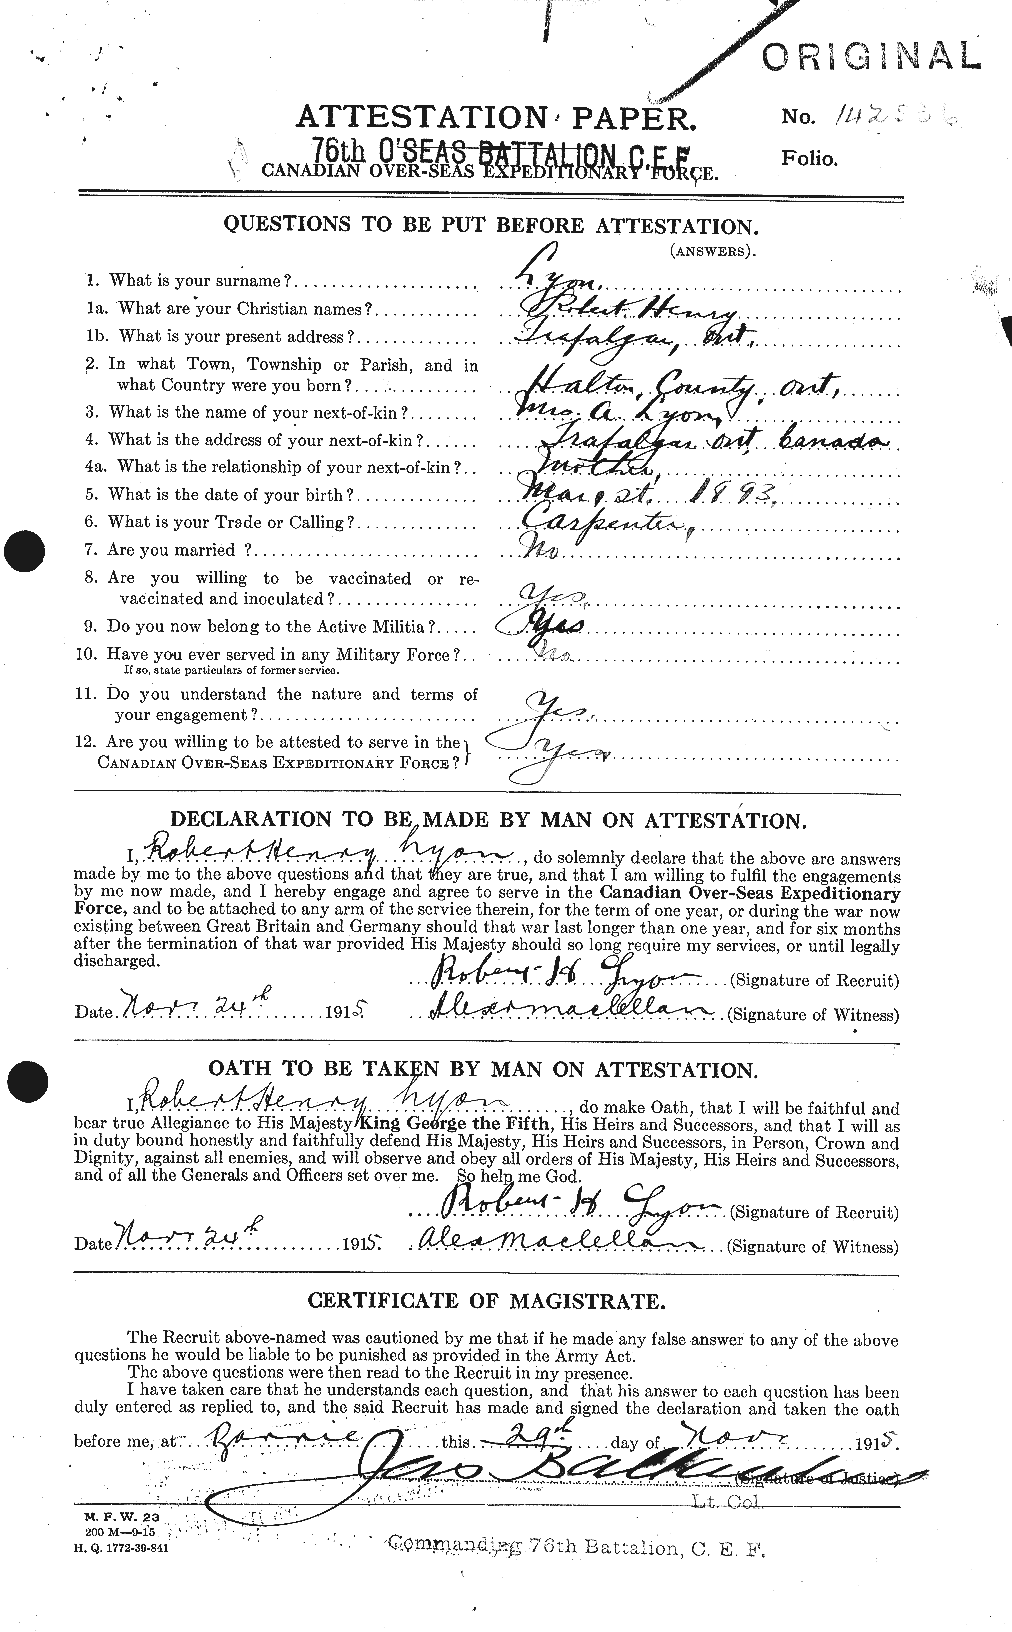 Personnel Records of the First World War - CEF 472959a